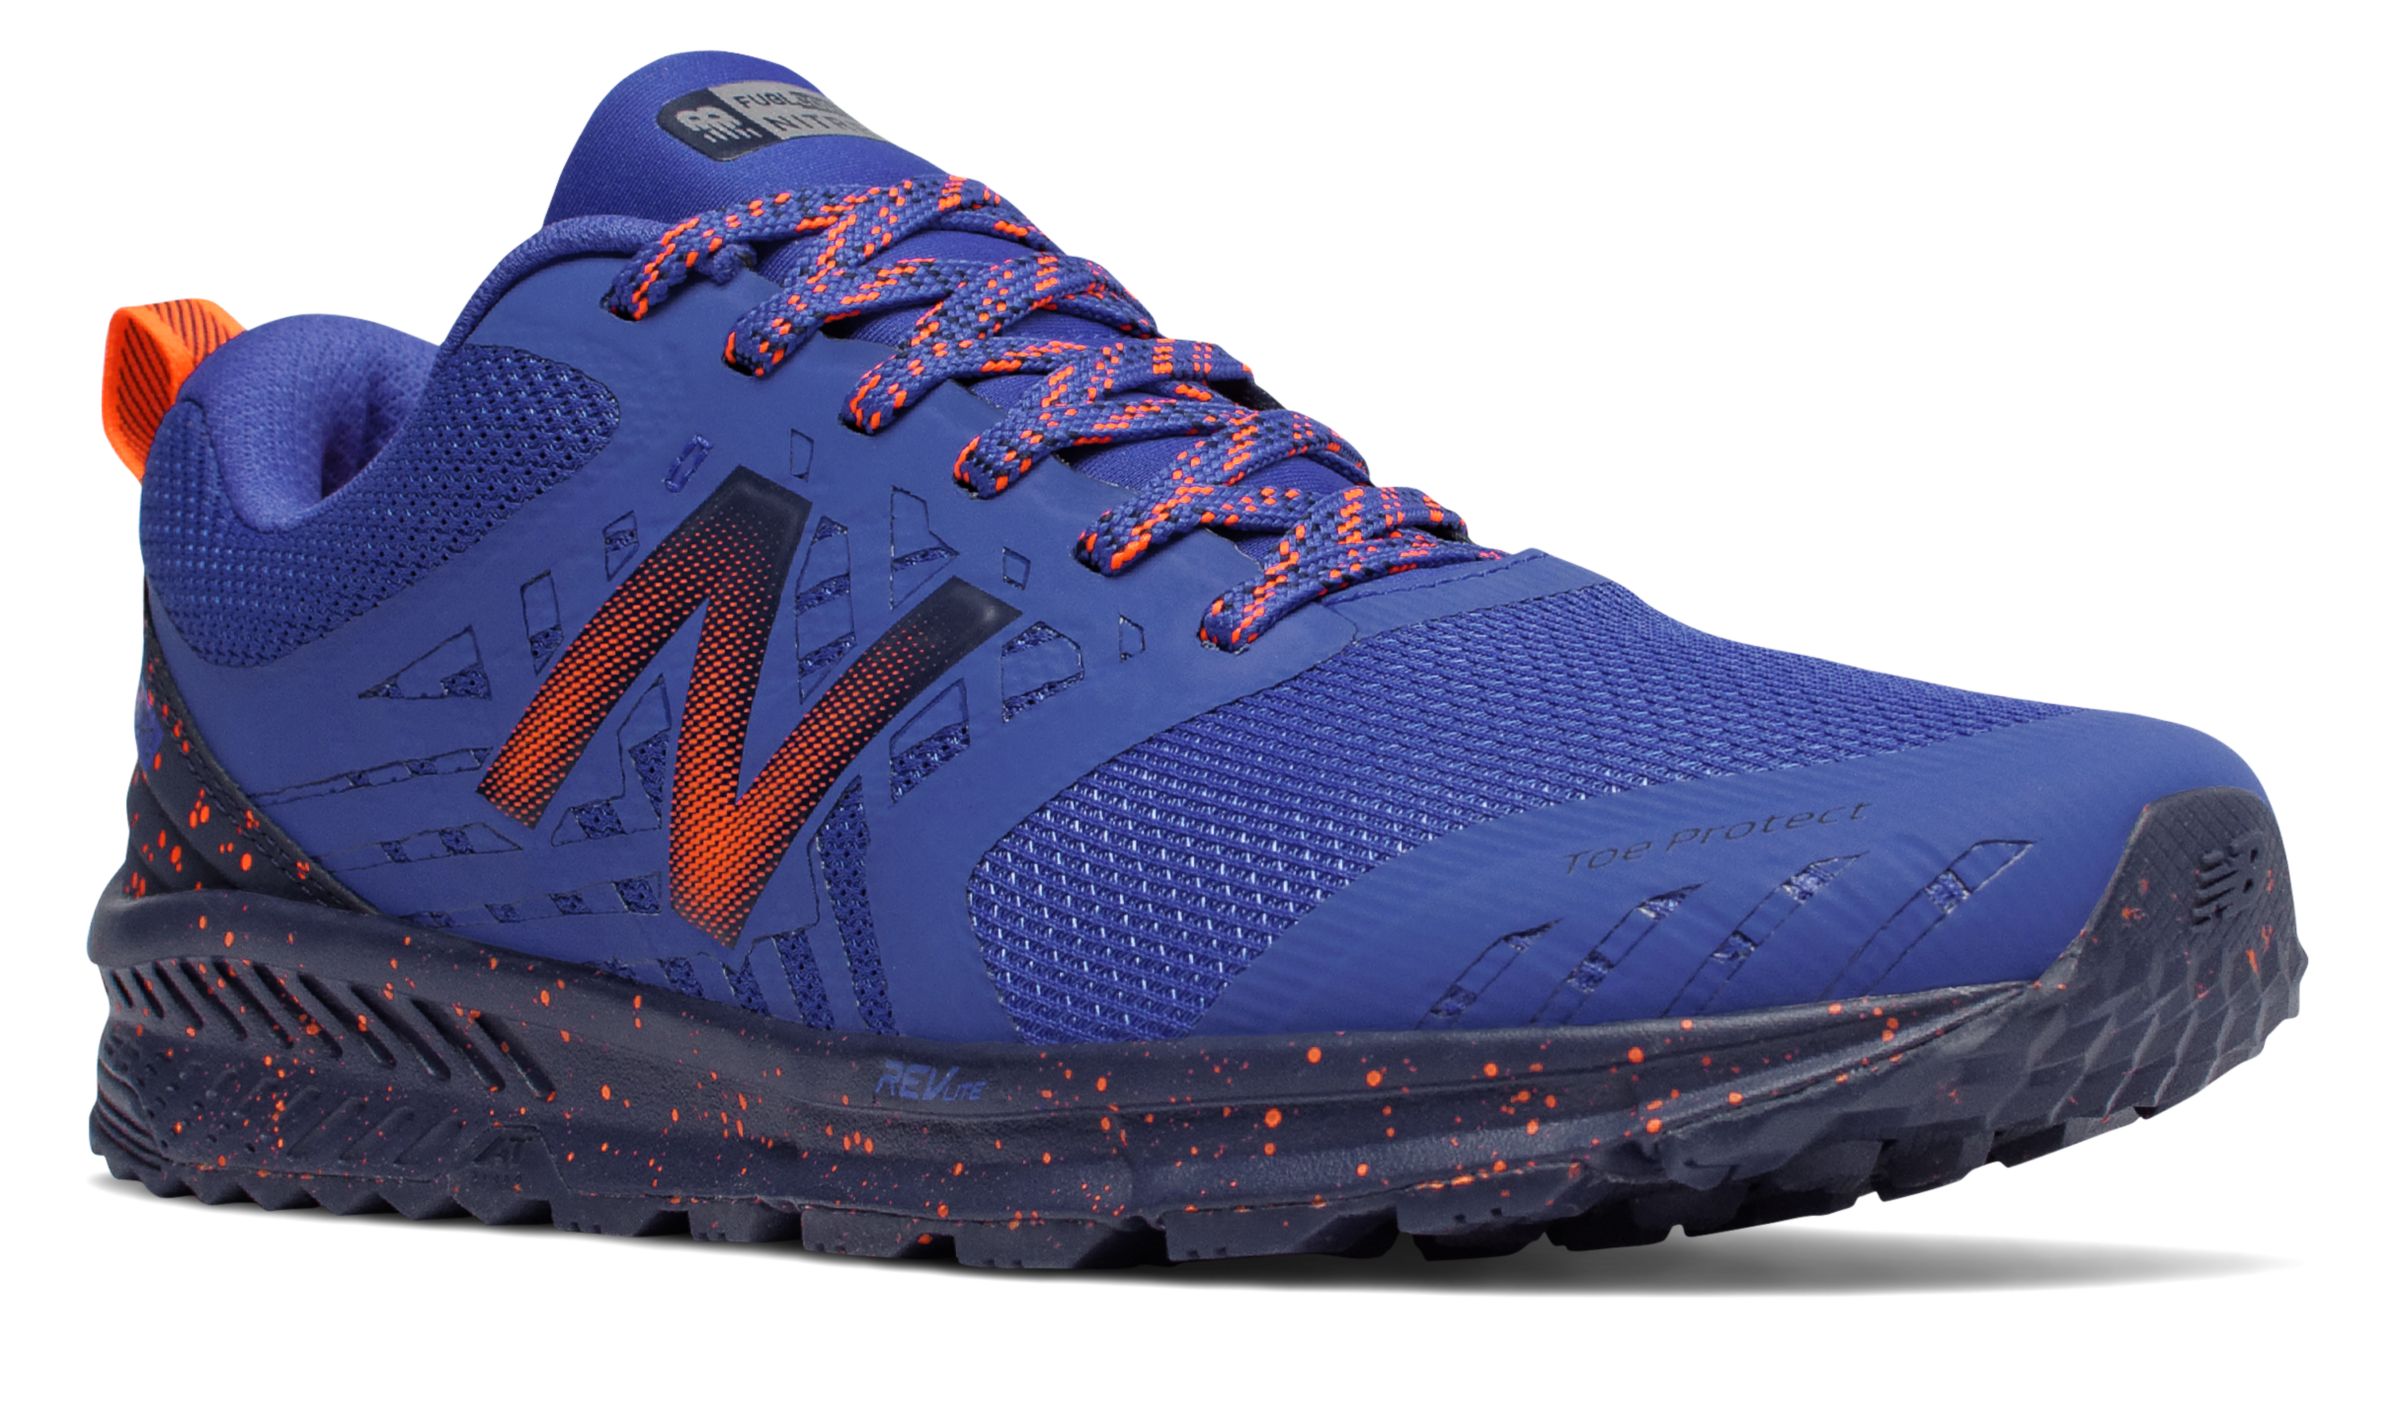 New Balance MTNTR on Sale - Discounts Up to 20% Off on MTNTRRP1 at Joe's  New Balance Outlet